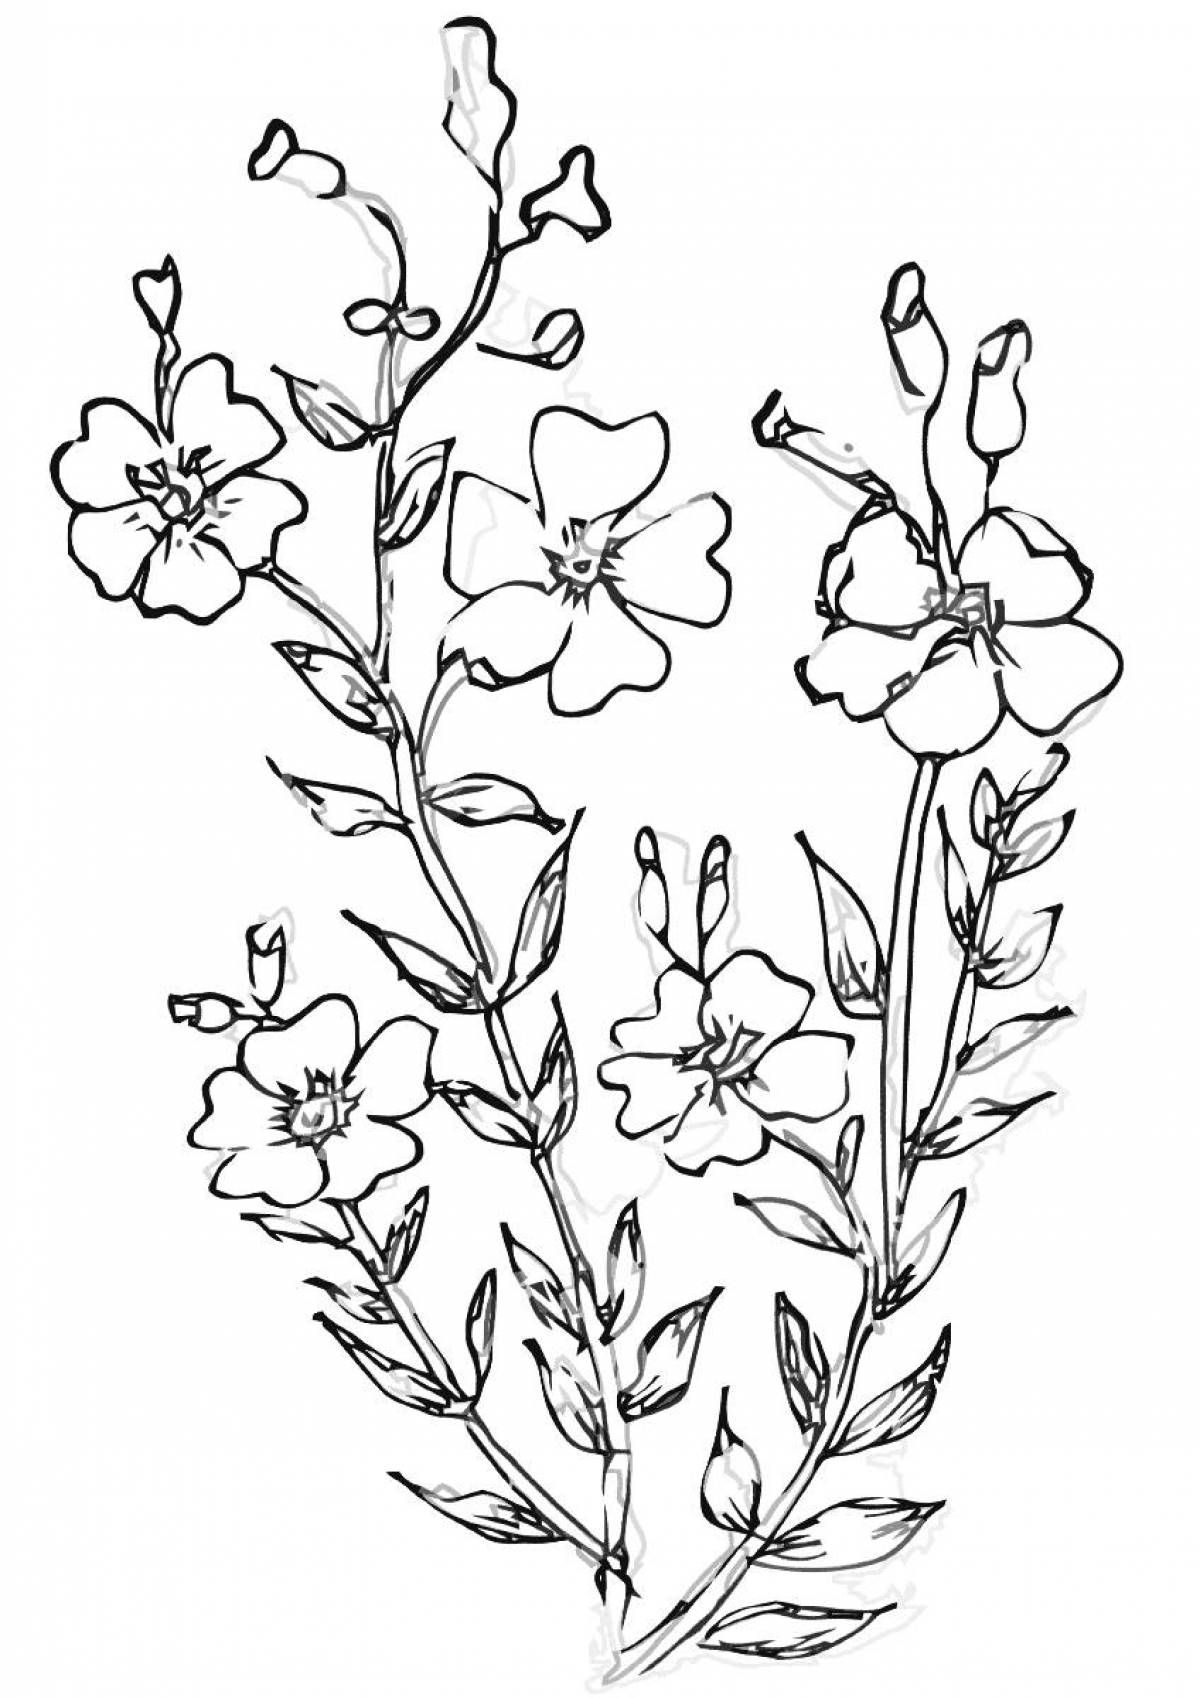 Linen coloring page